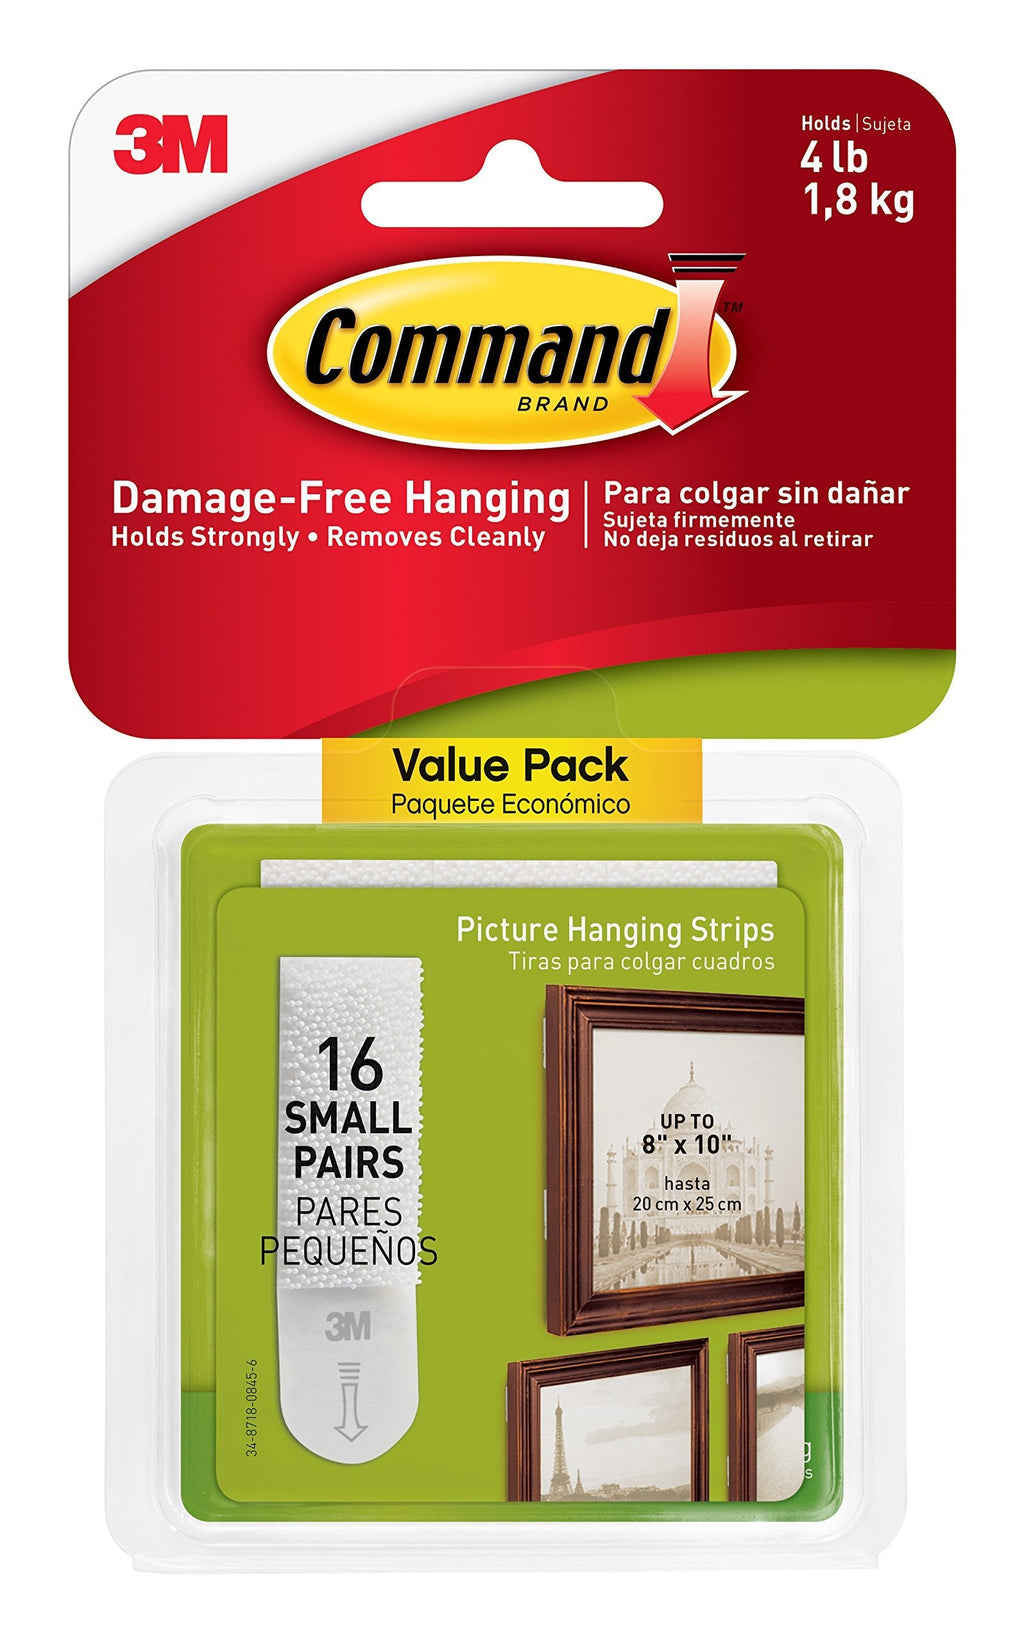  [AUSTRALIA] - Command 17205-16ES 3M Small Picture Hanging Strips Create Gallery Walls, Strong and Versatile, 16 Pairs, White